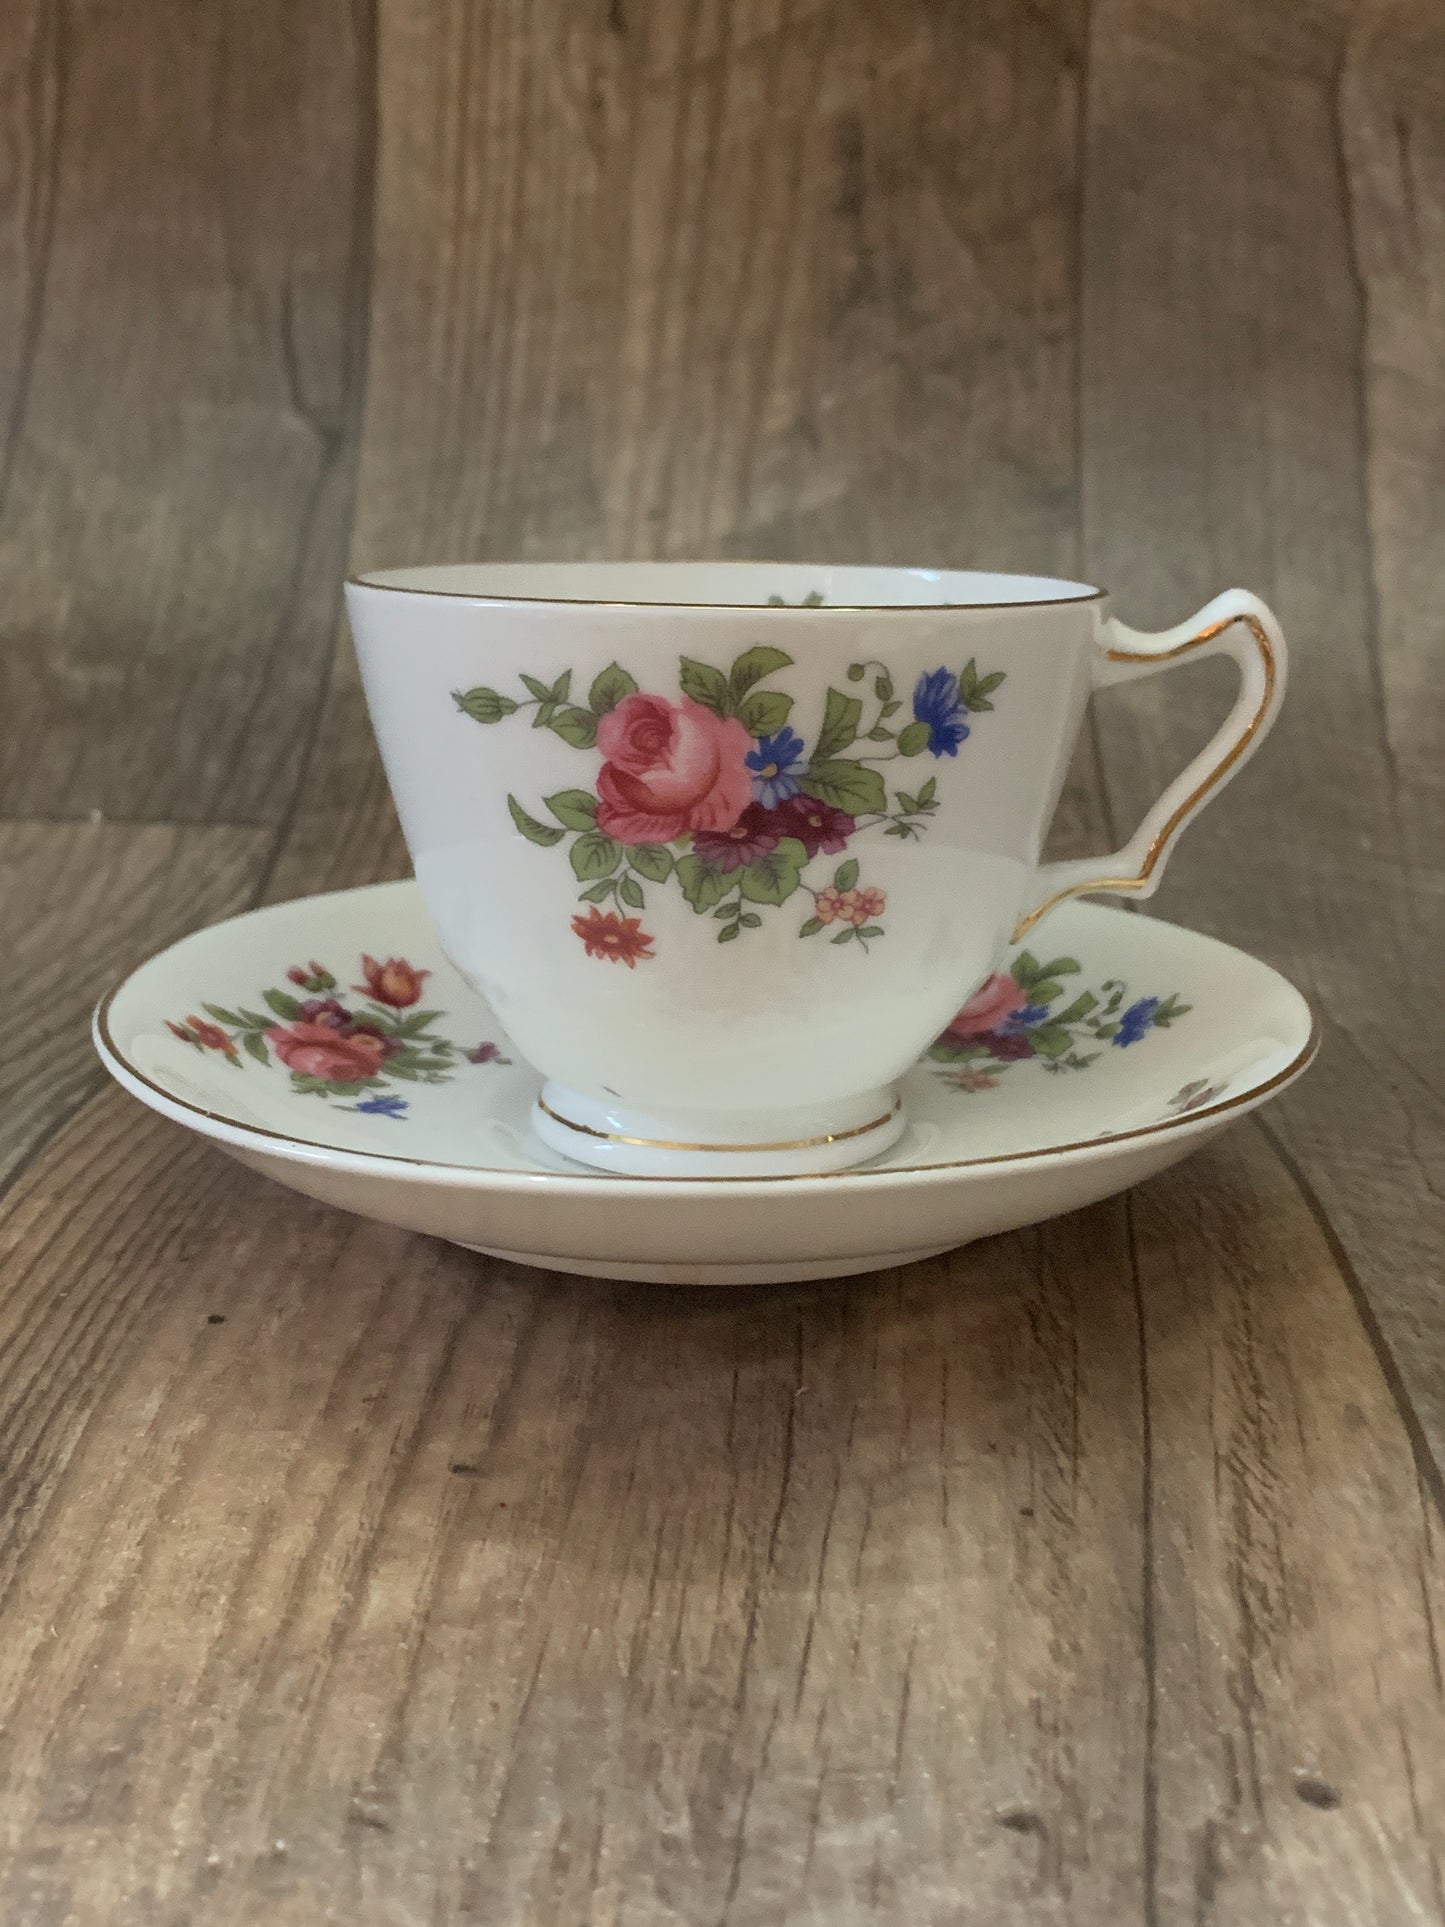 Vintage Teacup with Floral Pattern Staffordshire Tea Cup with Rose Bouquet Mothers Day Gifts